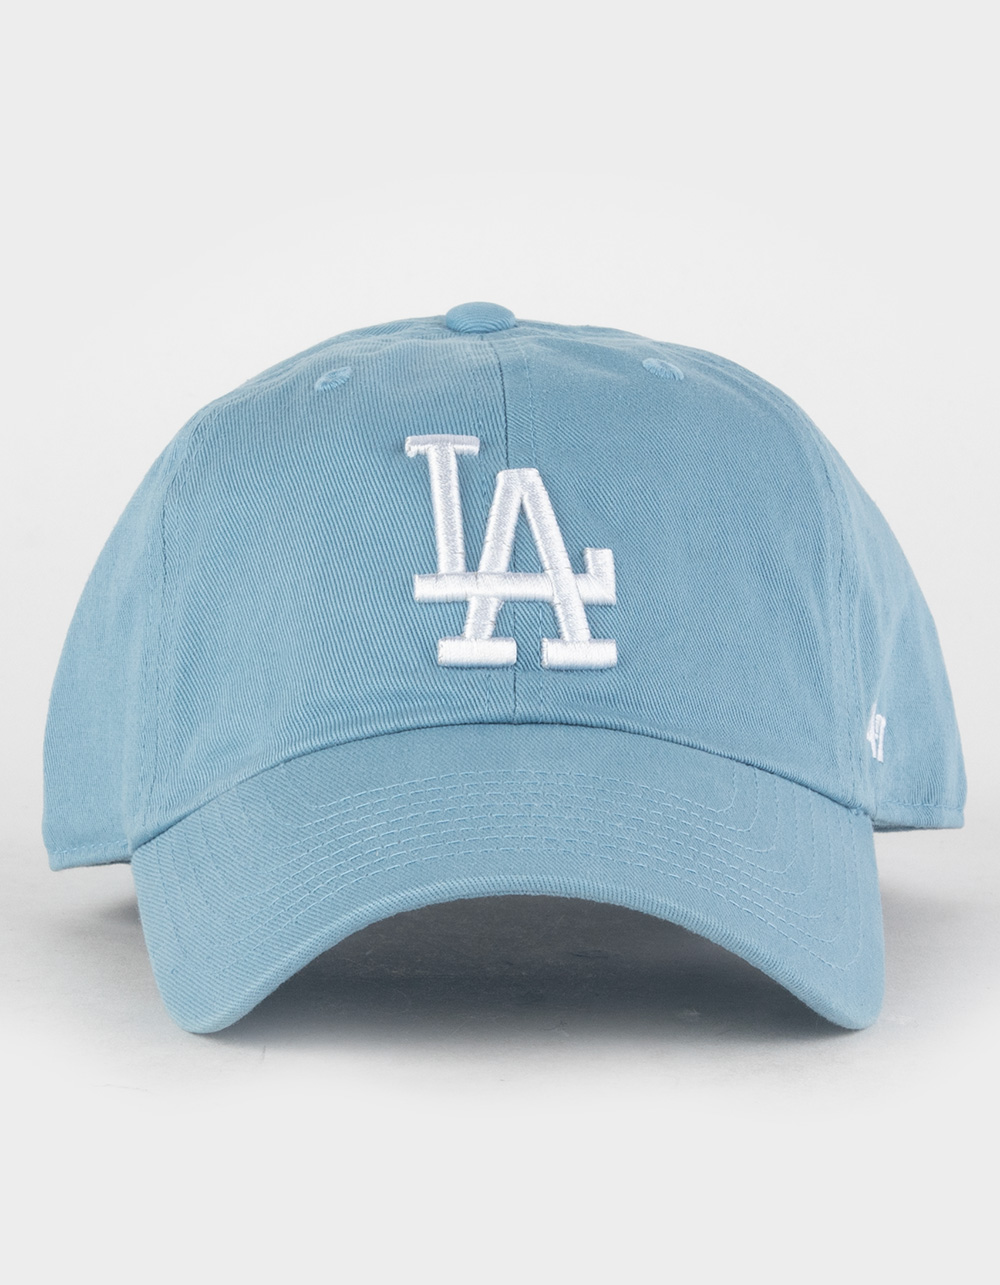 Los Angeles Dodgers on X: The Boys in Blue will be wearing their